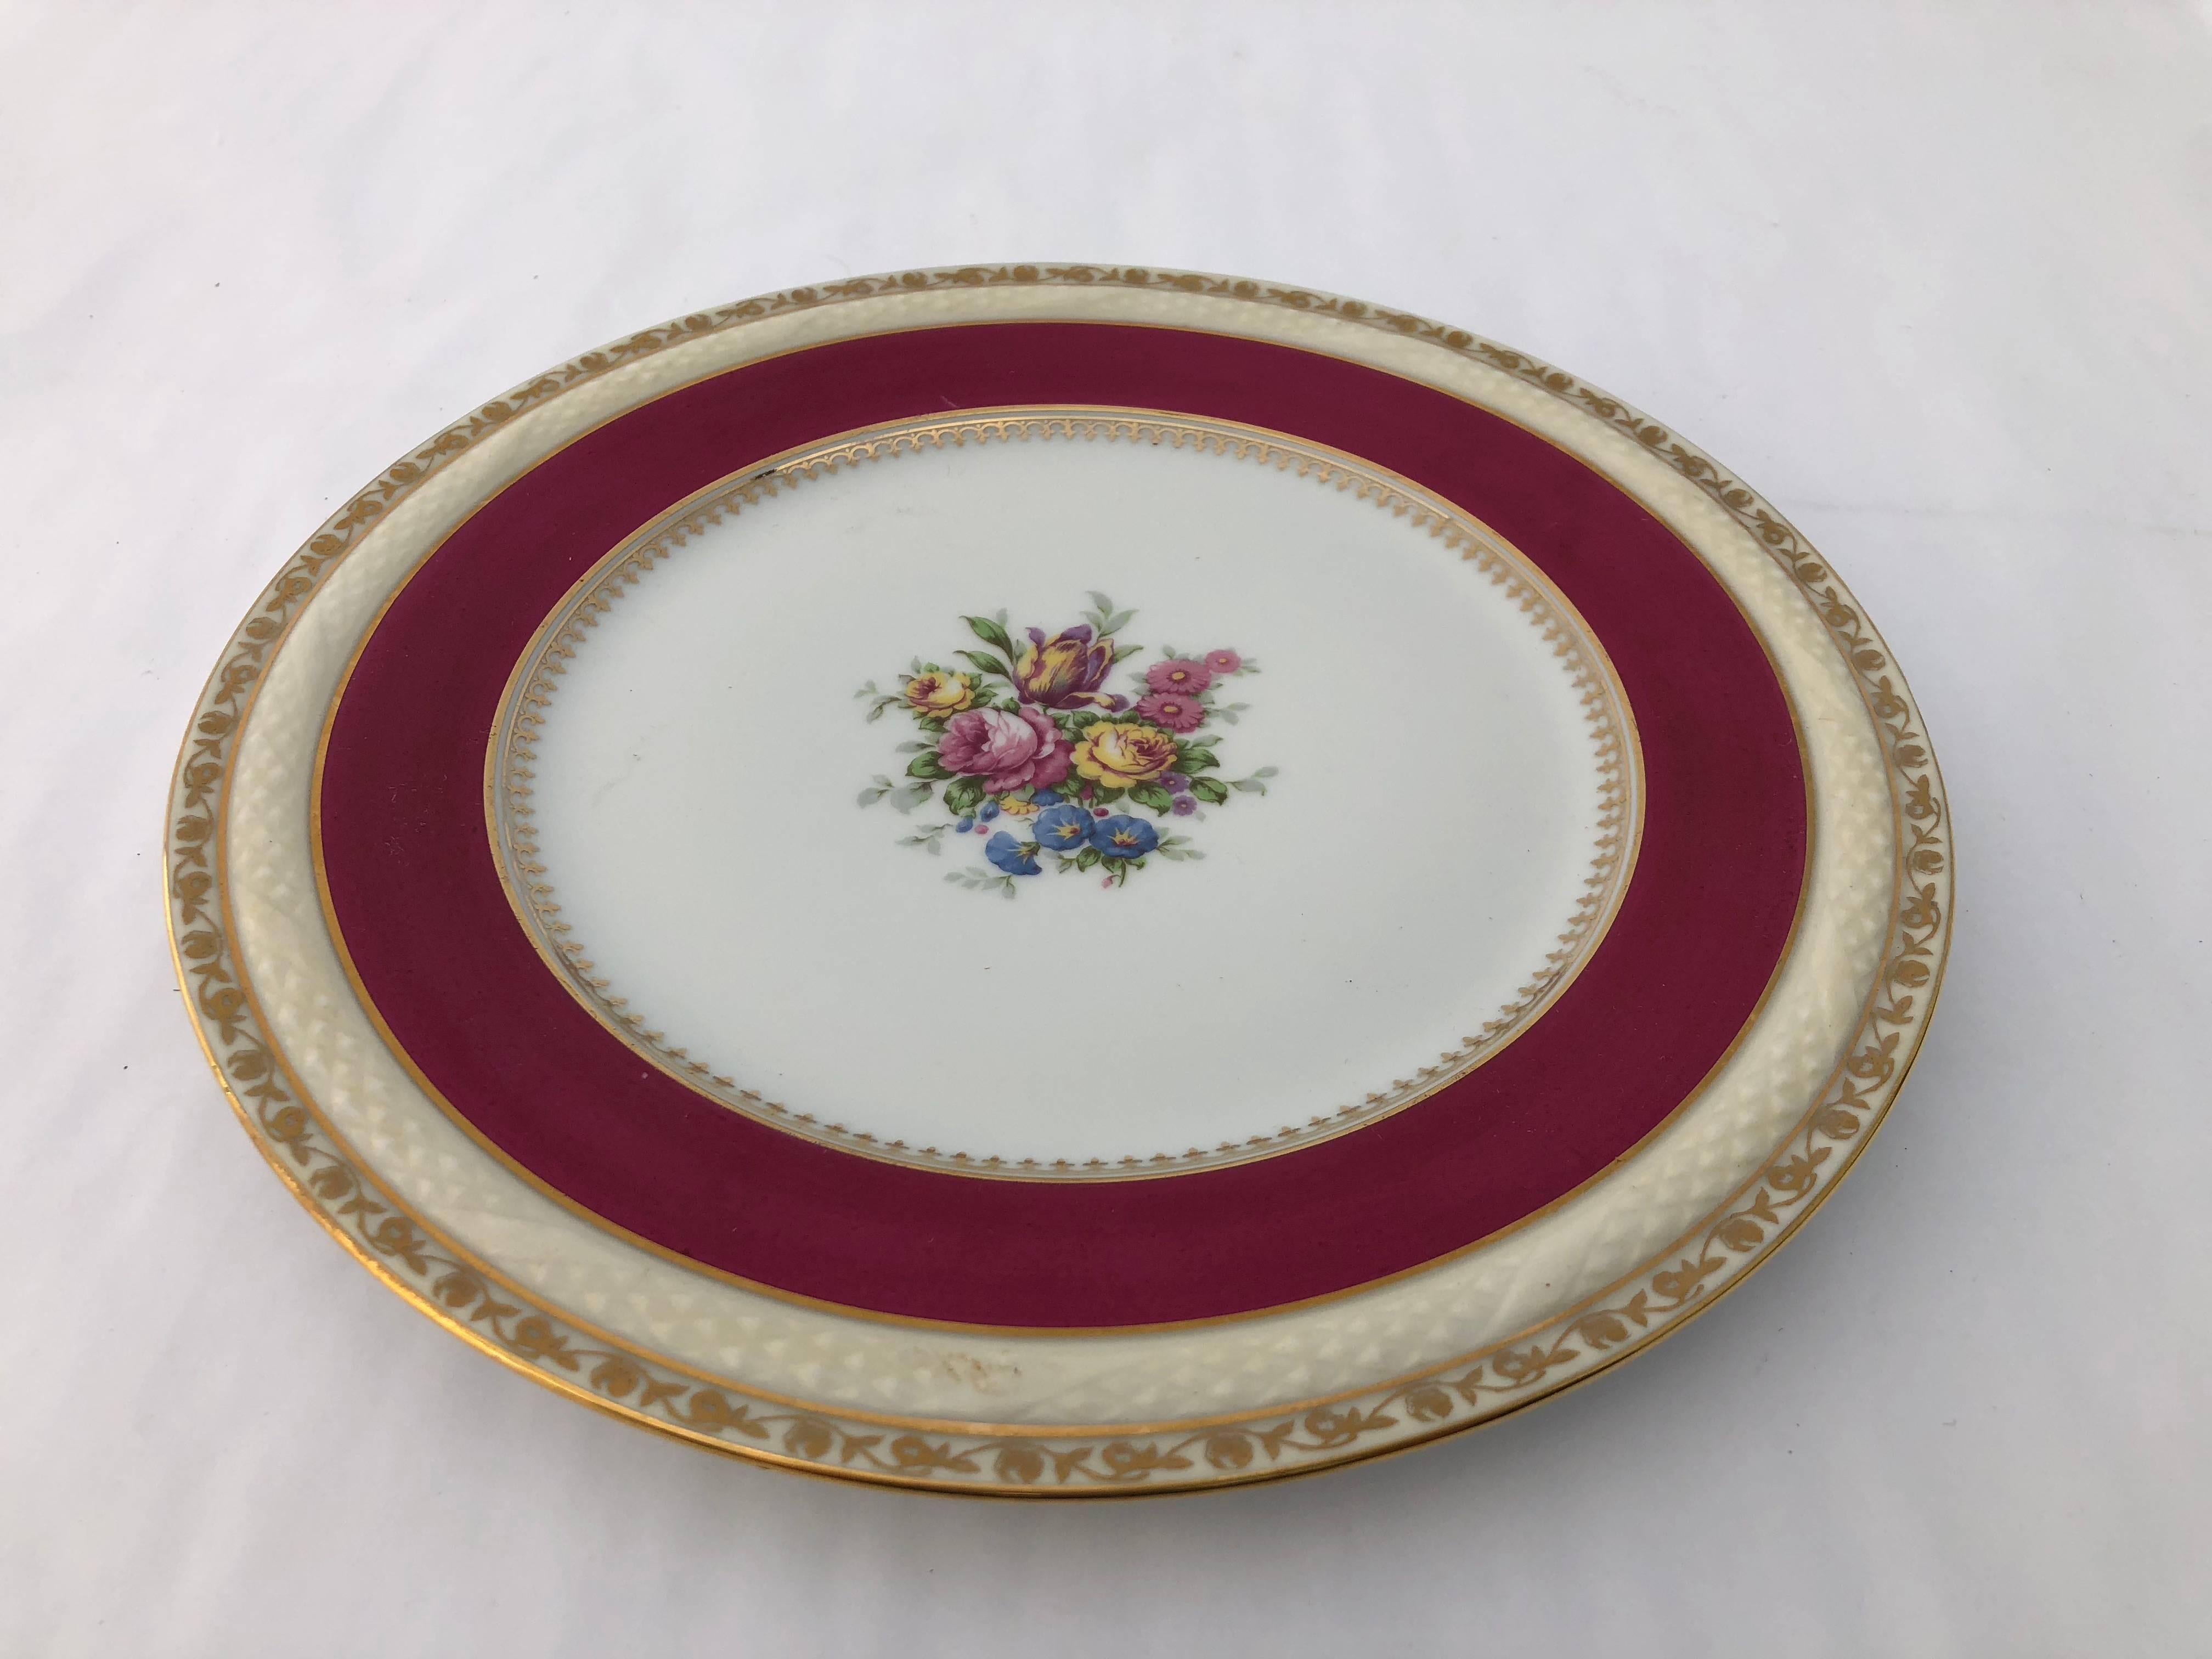 20th Century 2 French Limoges Serving Plates, Hand-Painted Red, Gold with Decorative Flowers For Sale